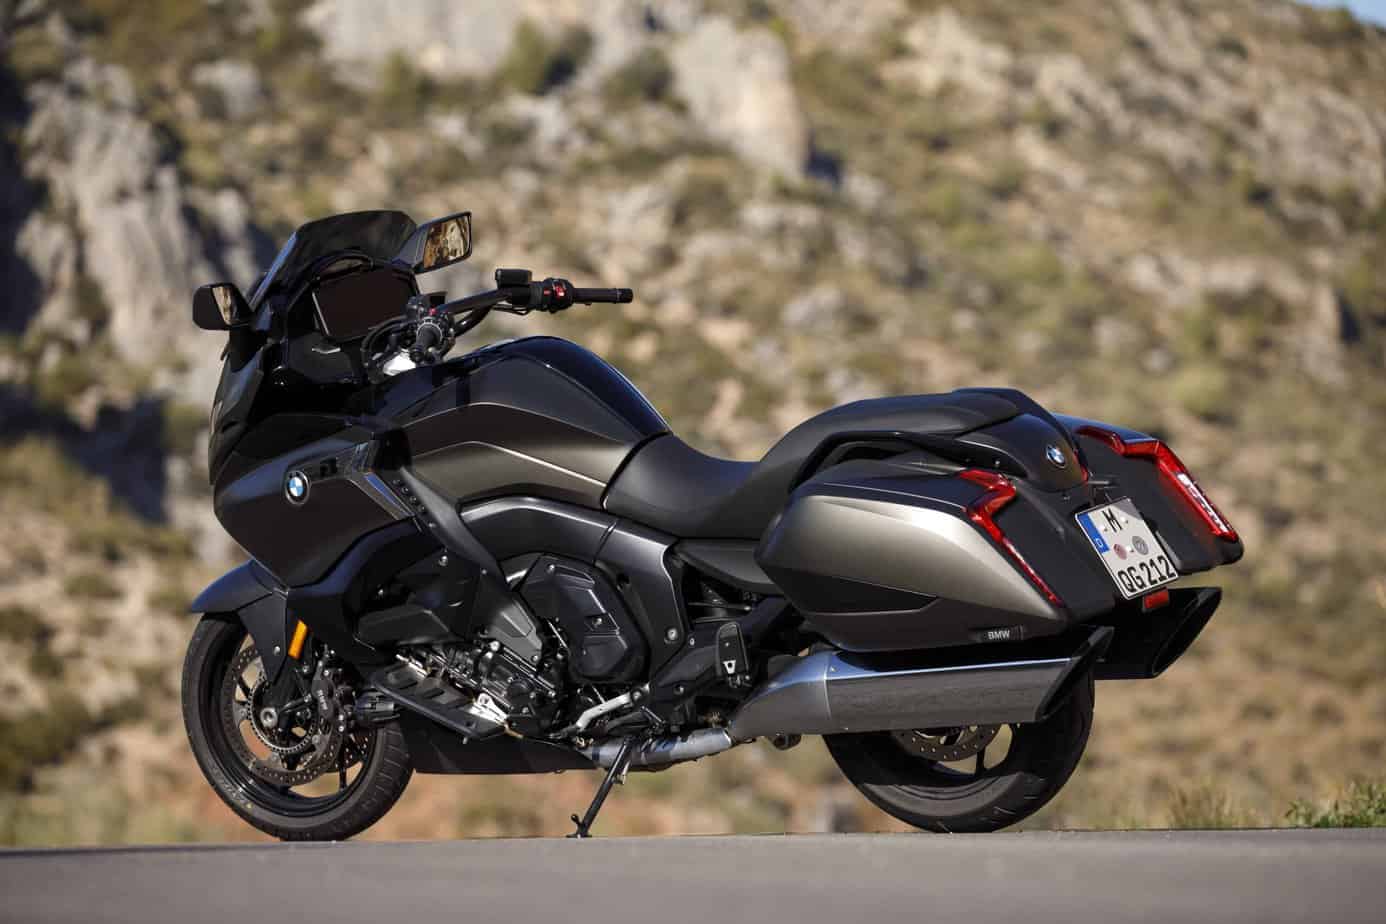 2023 BMW K 1600 B: A Sleek and Powerful Touring Motorcycle